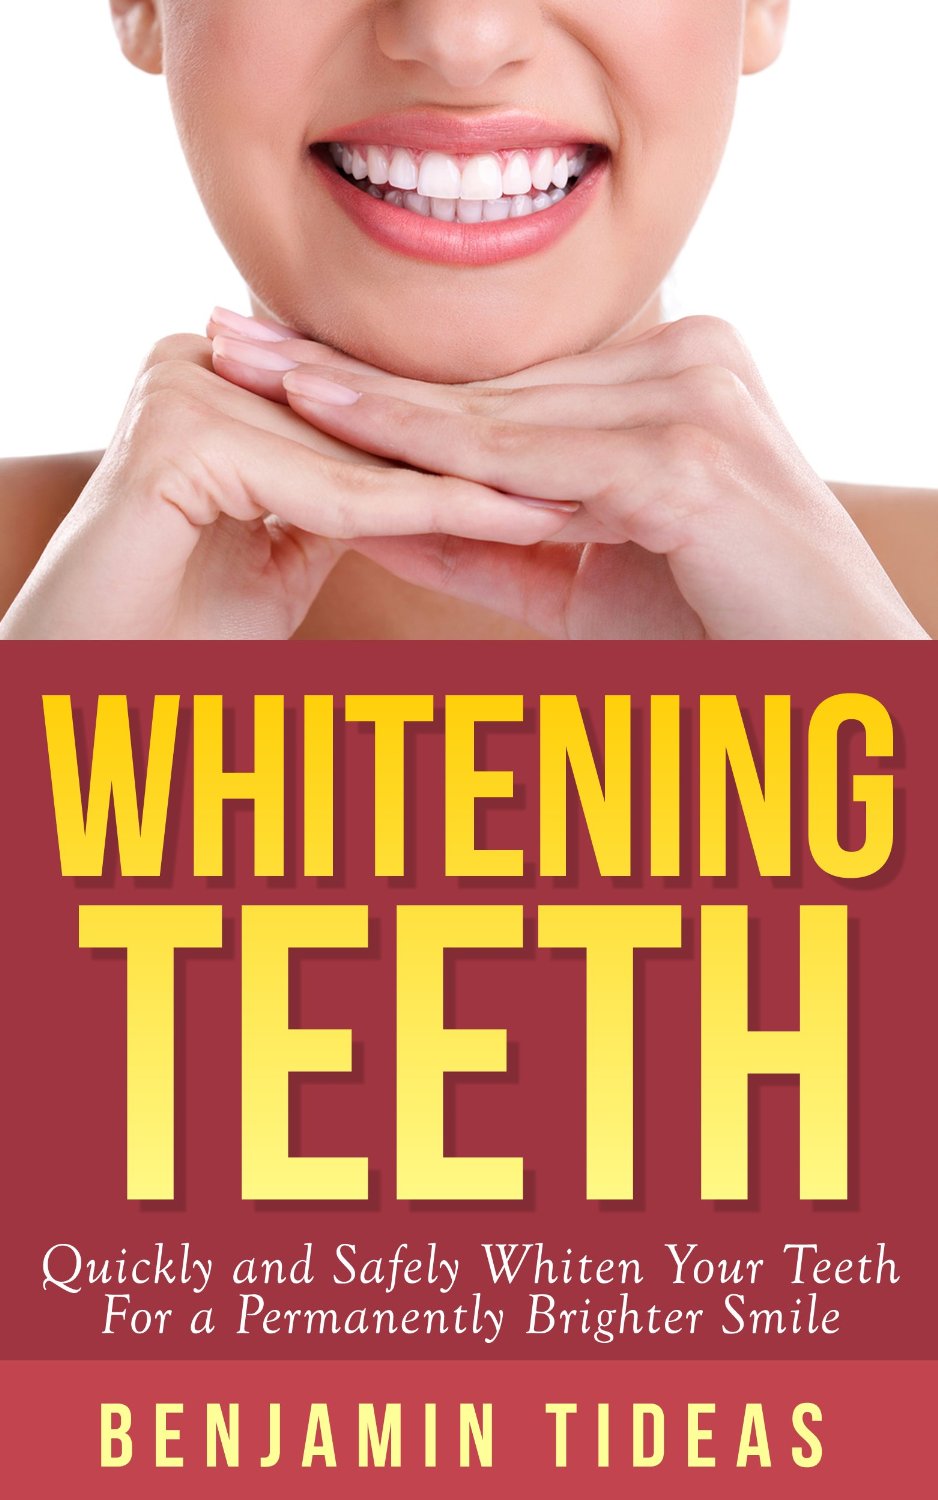 Whitening Teeth: Quickly and Safely Whiten Your Teeth for a Permanently Brighter Smile by Benjamin Tideas